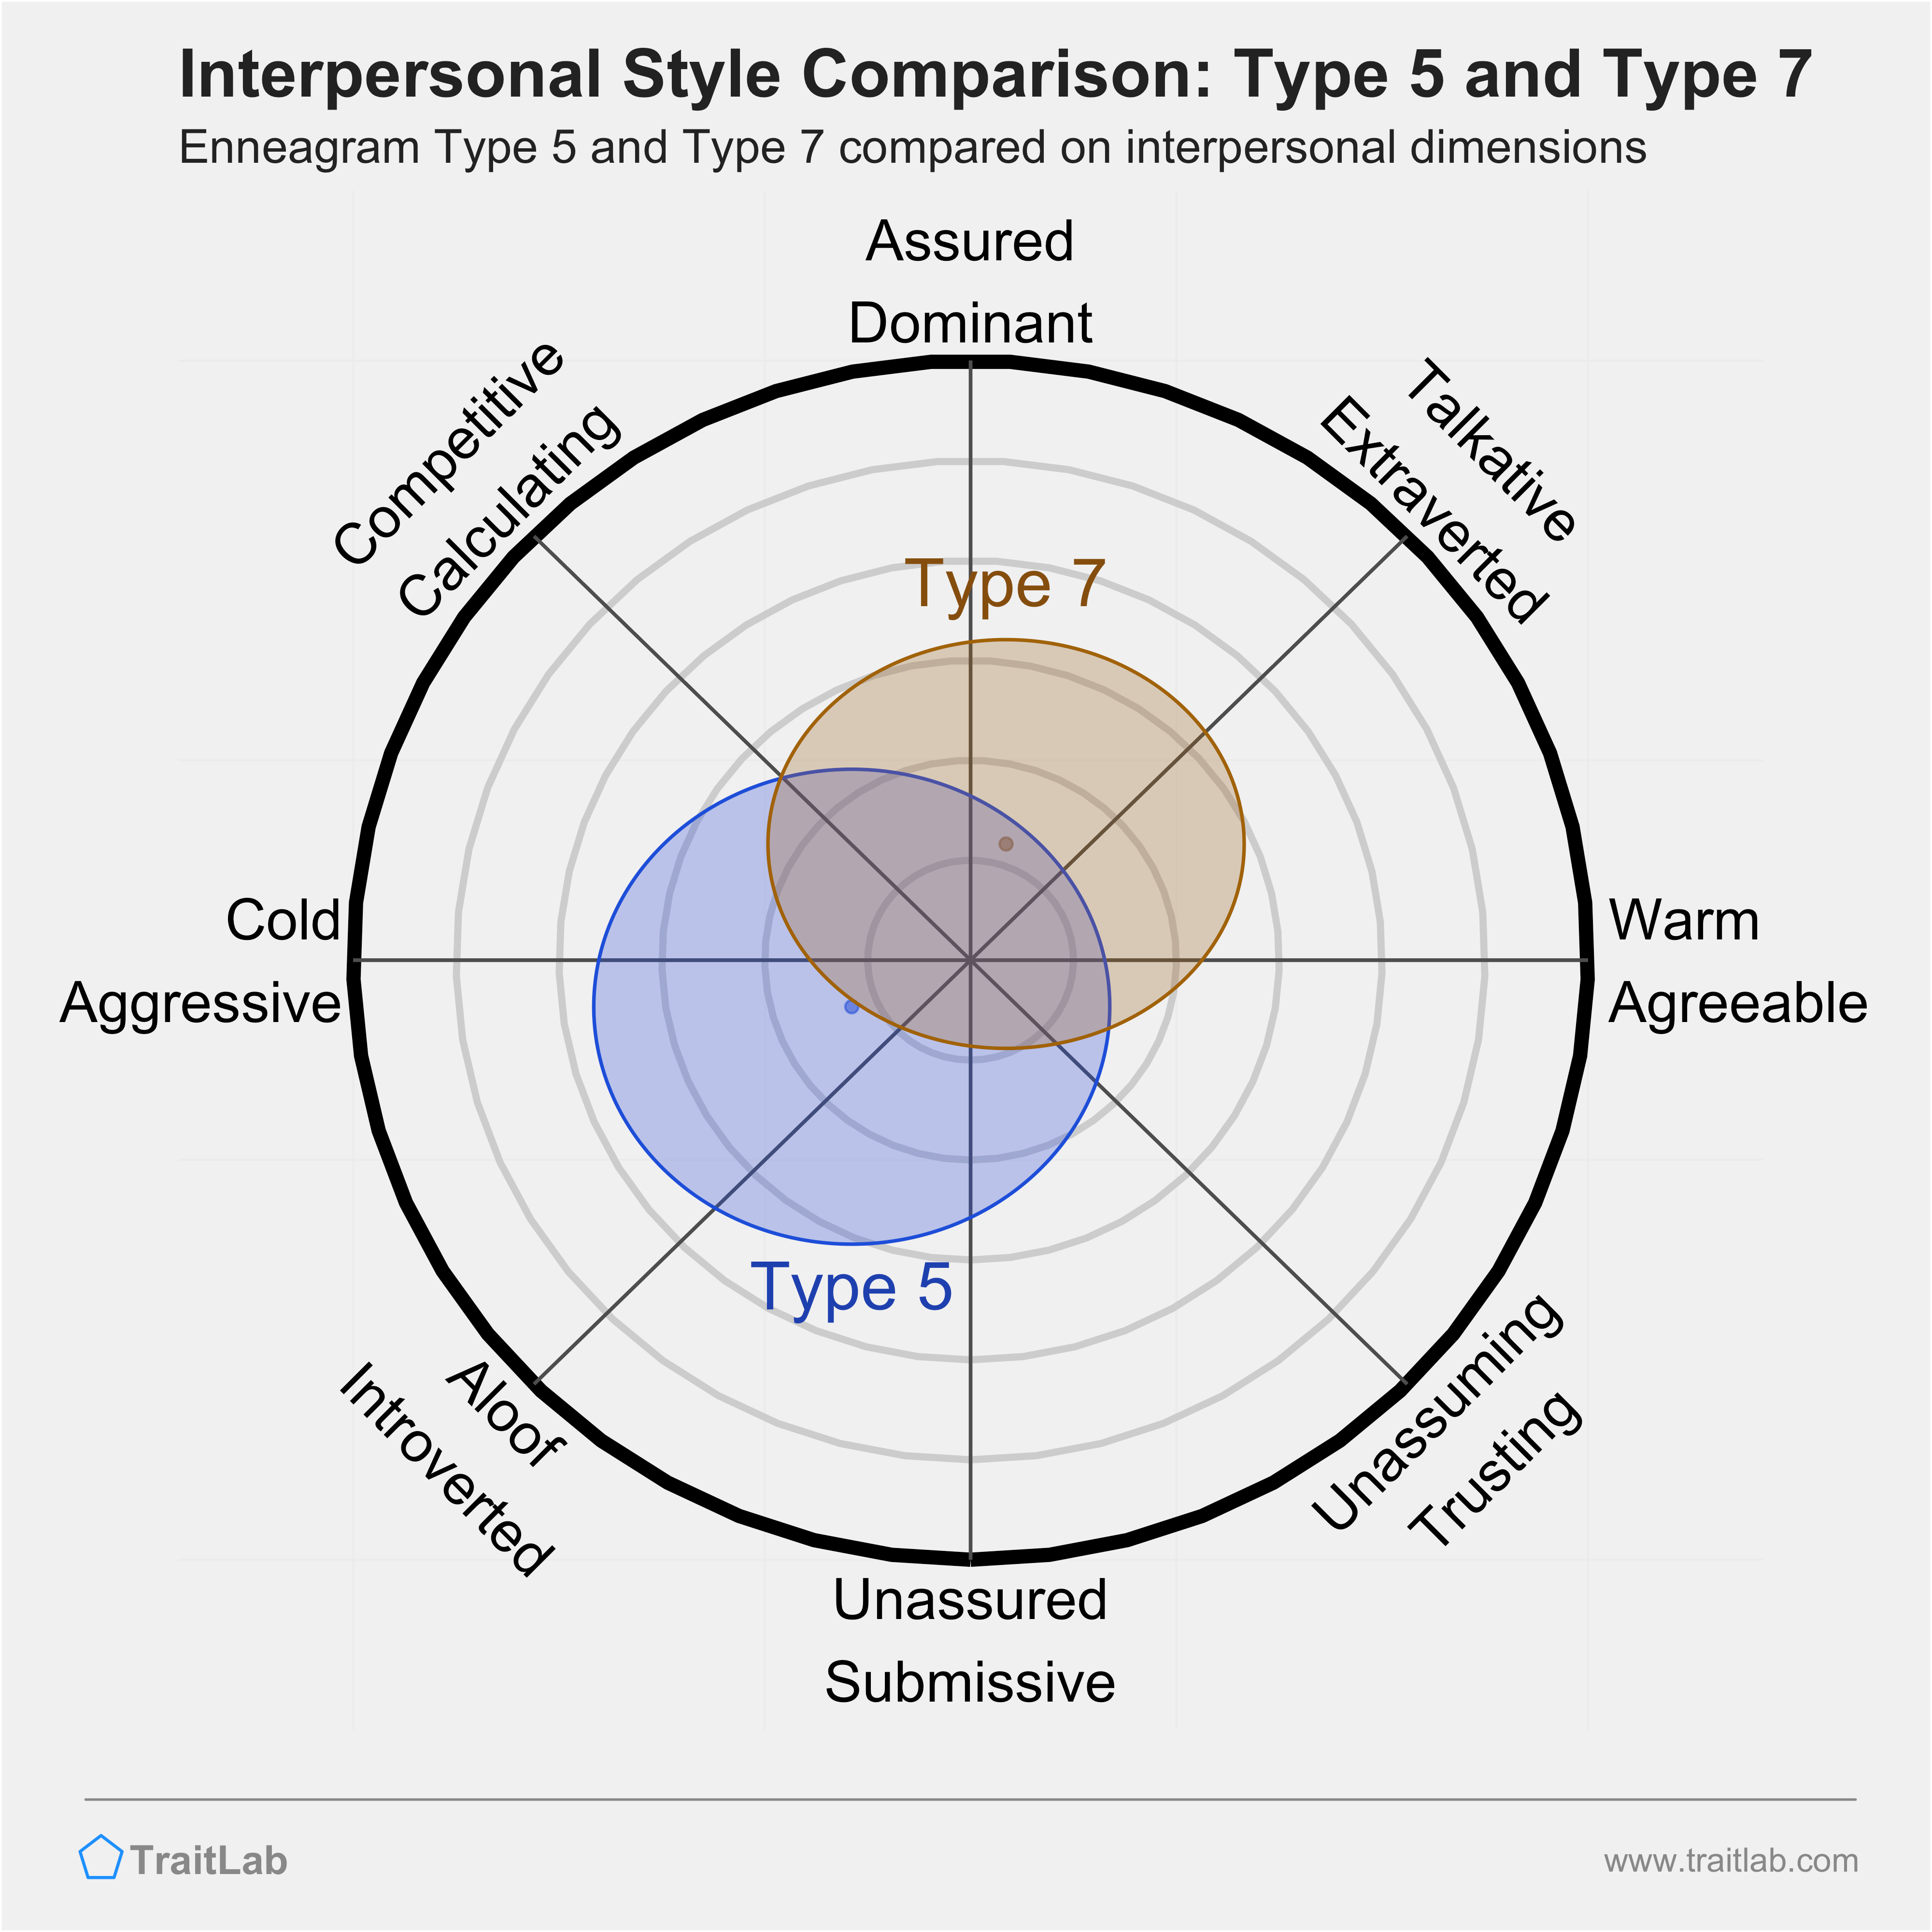 Enneagram Type 5 and Type 7 comparison across interpersonal dimensions